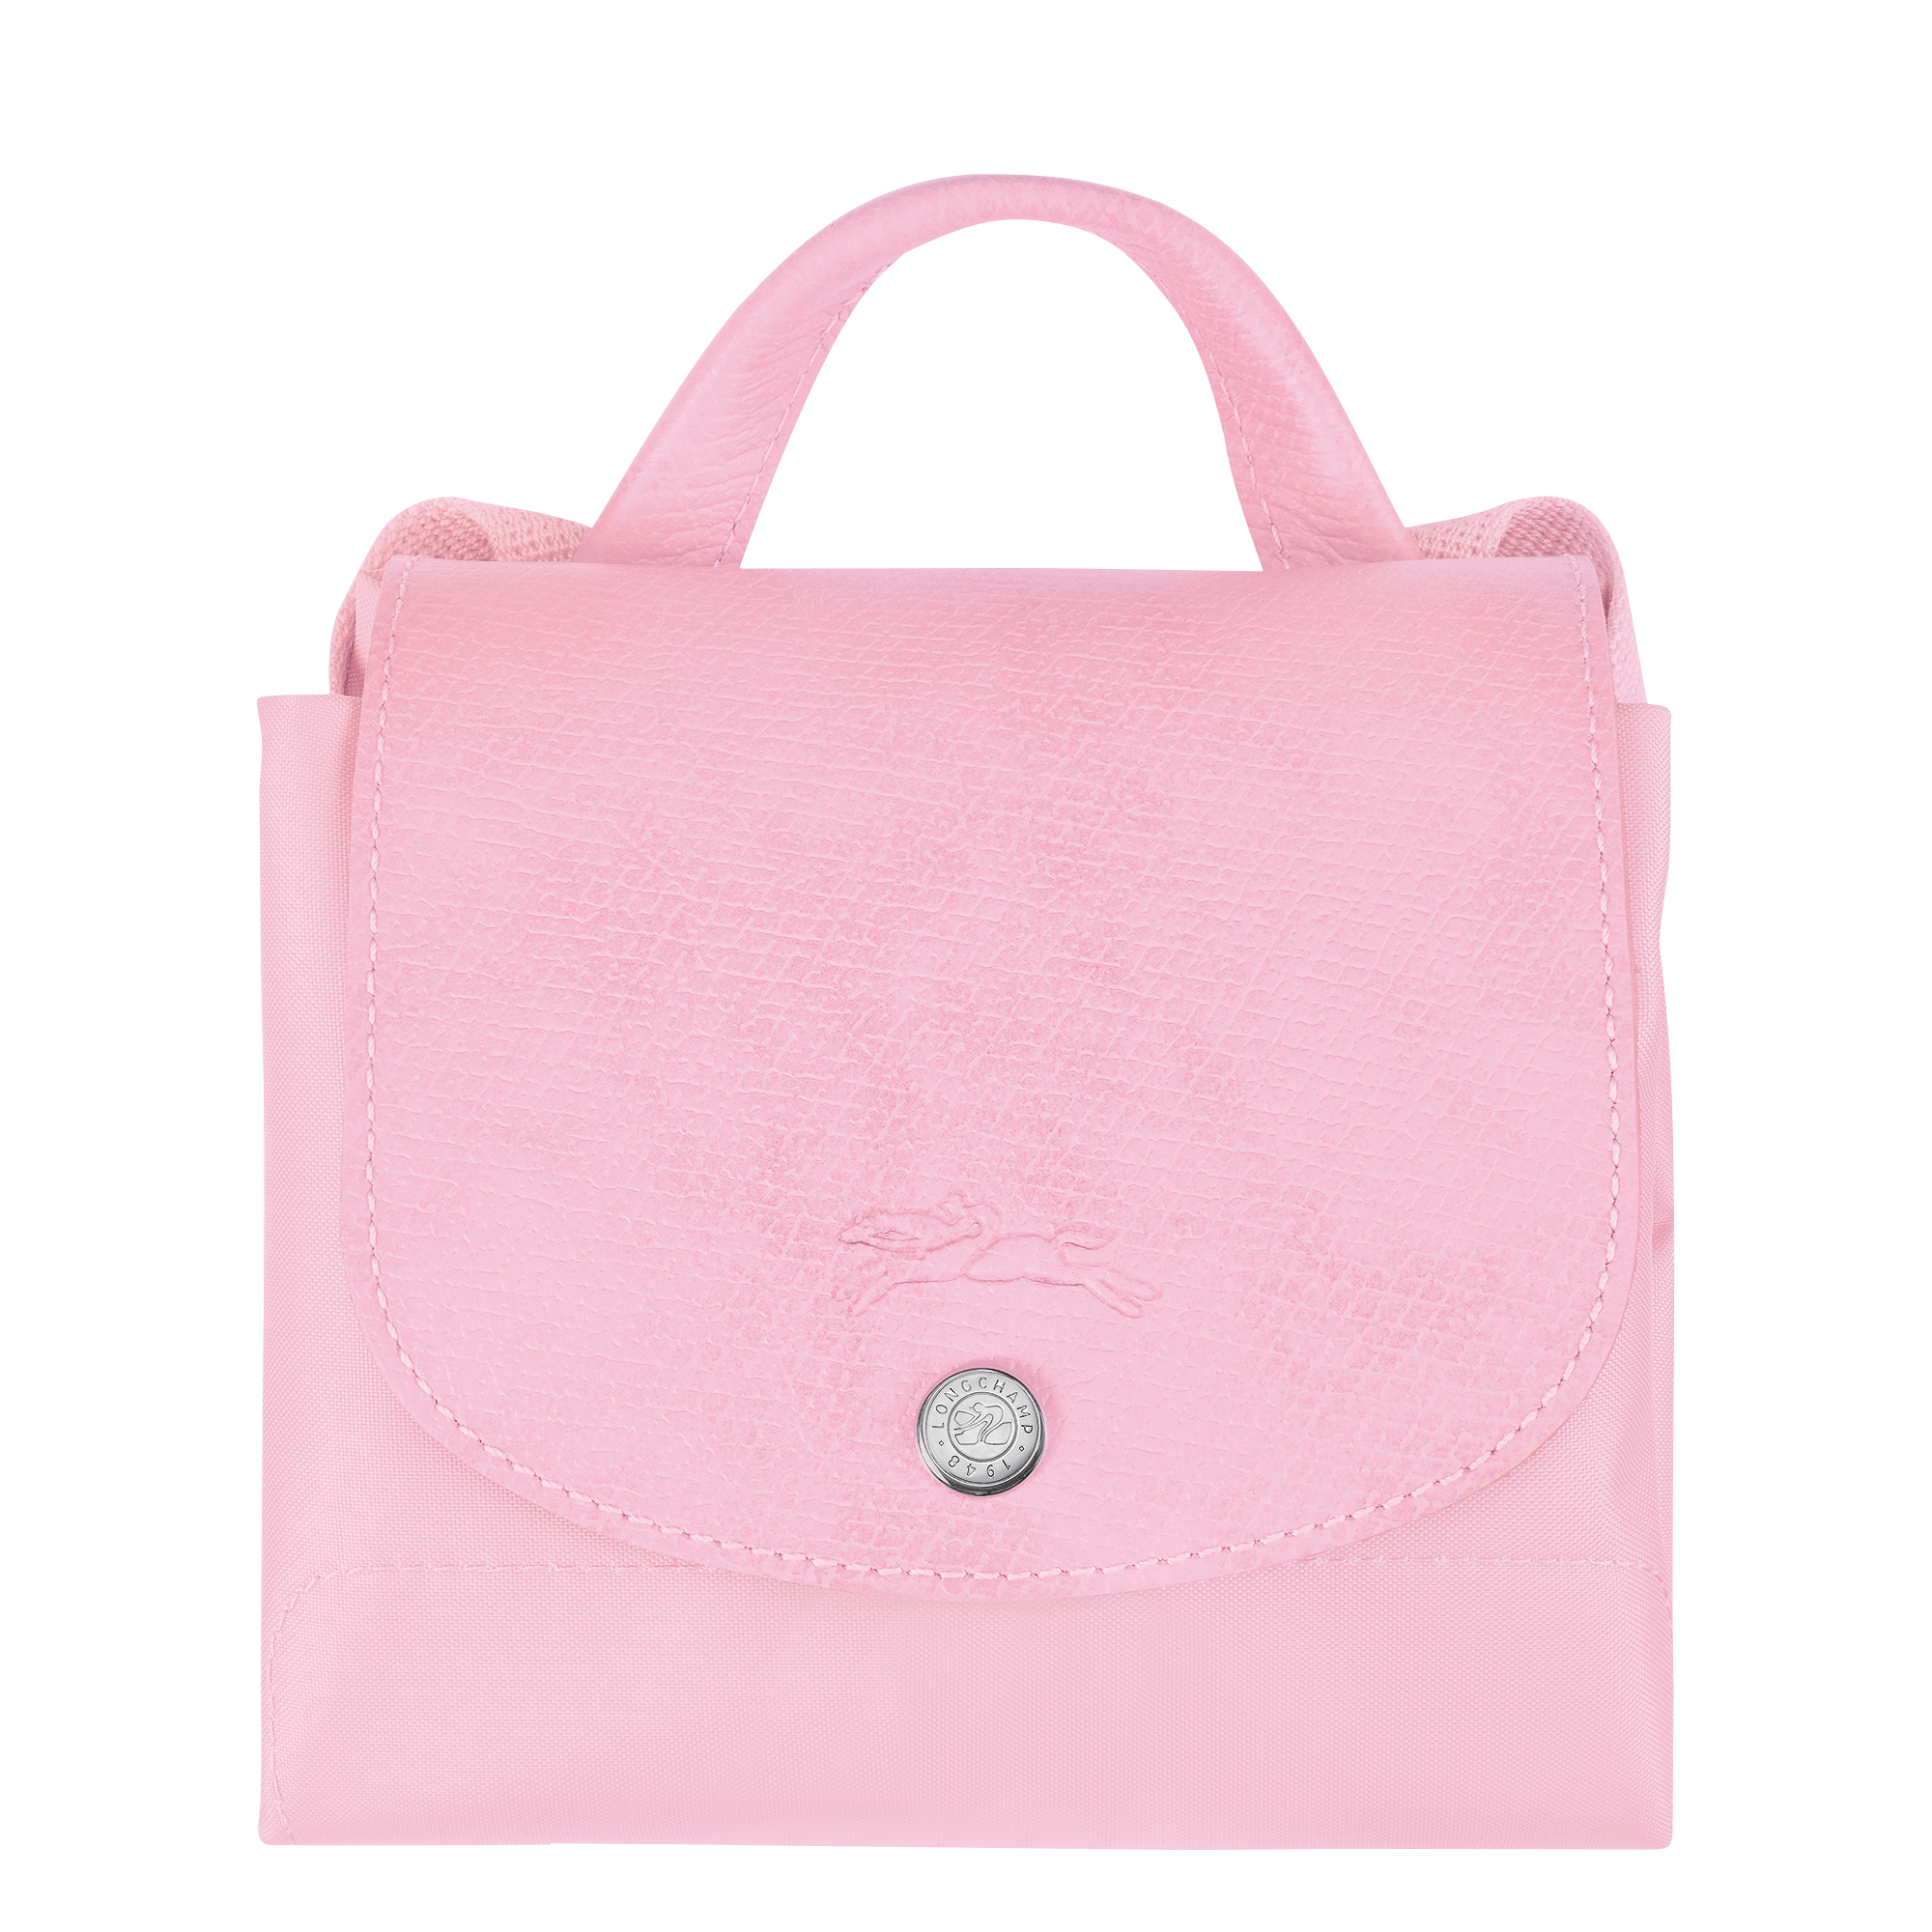 Le Pliage Green Backpack, Pink